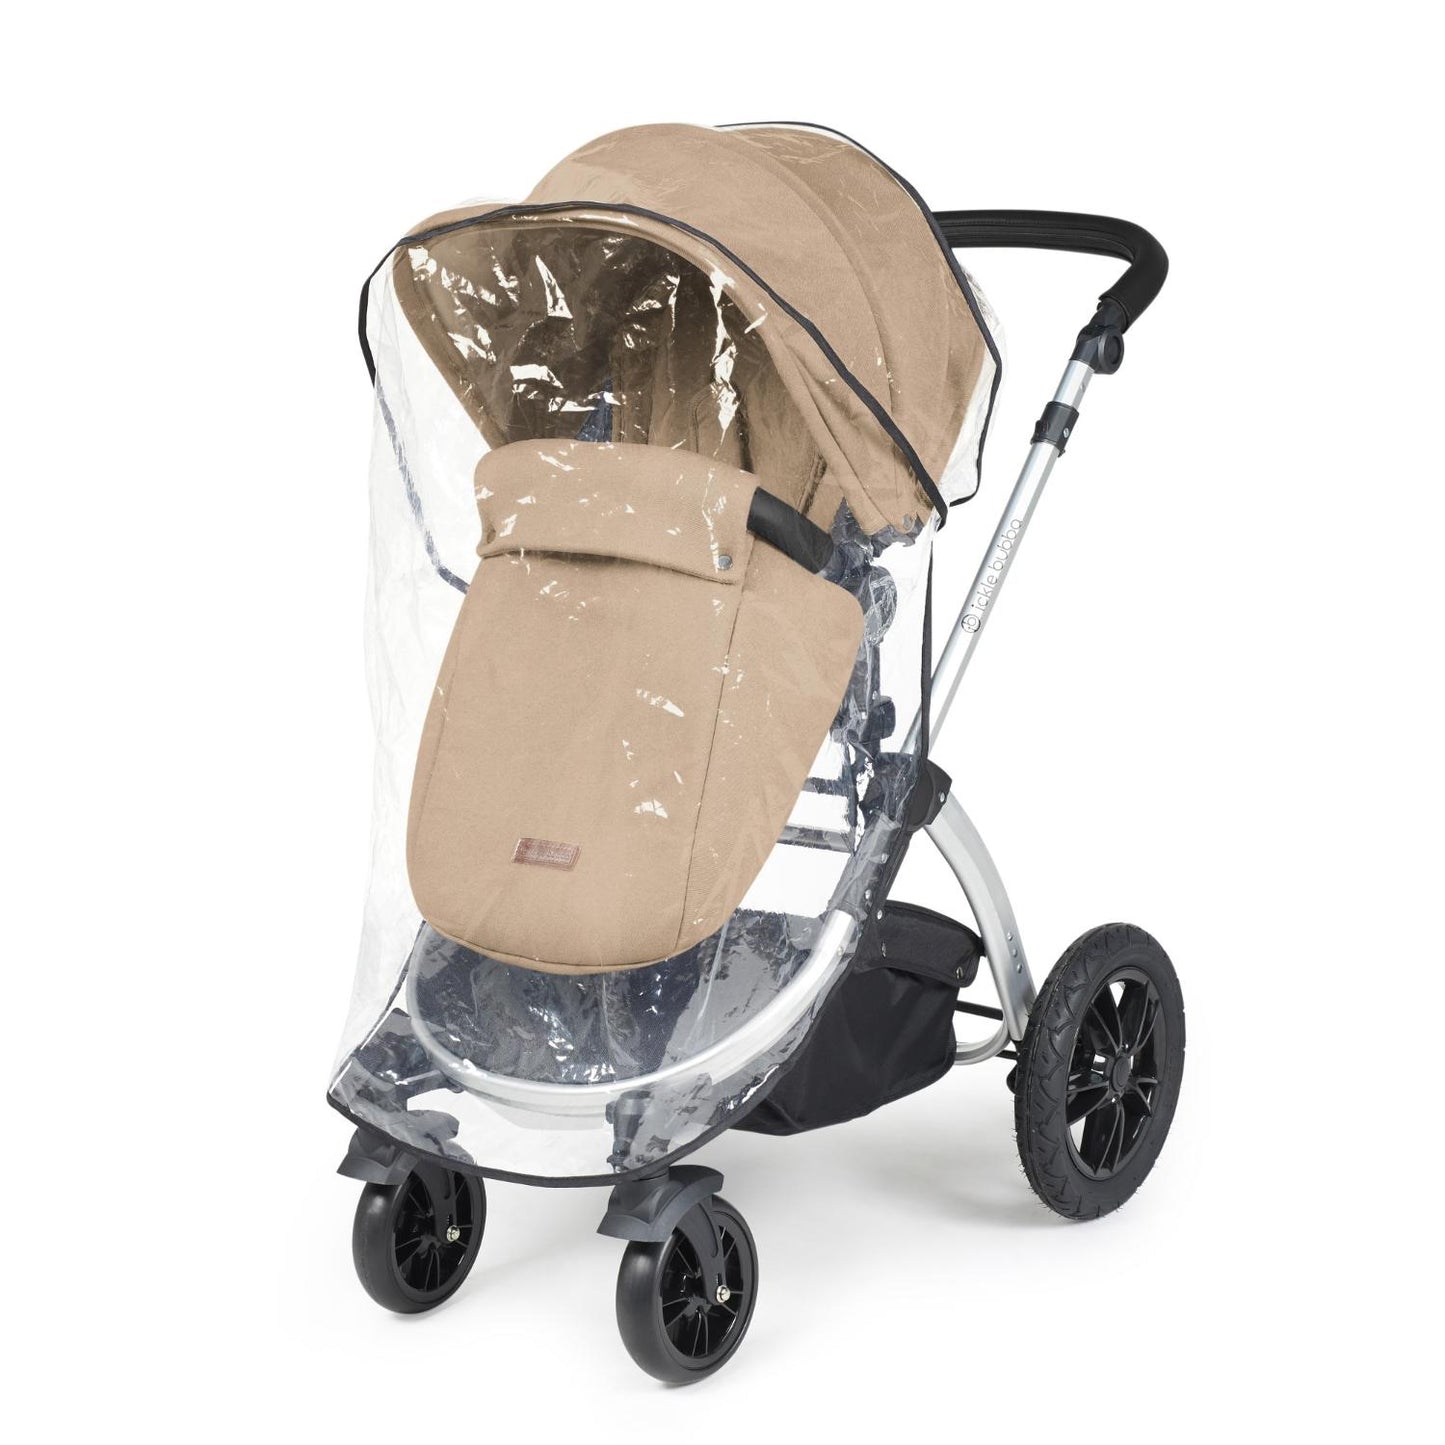 Rain cover placed on an Ickle Bubba Stomp Luxe Pushchair in Desert beige colour with silver chassis